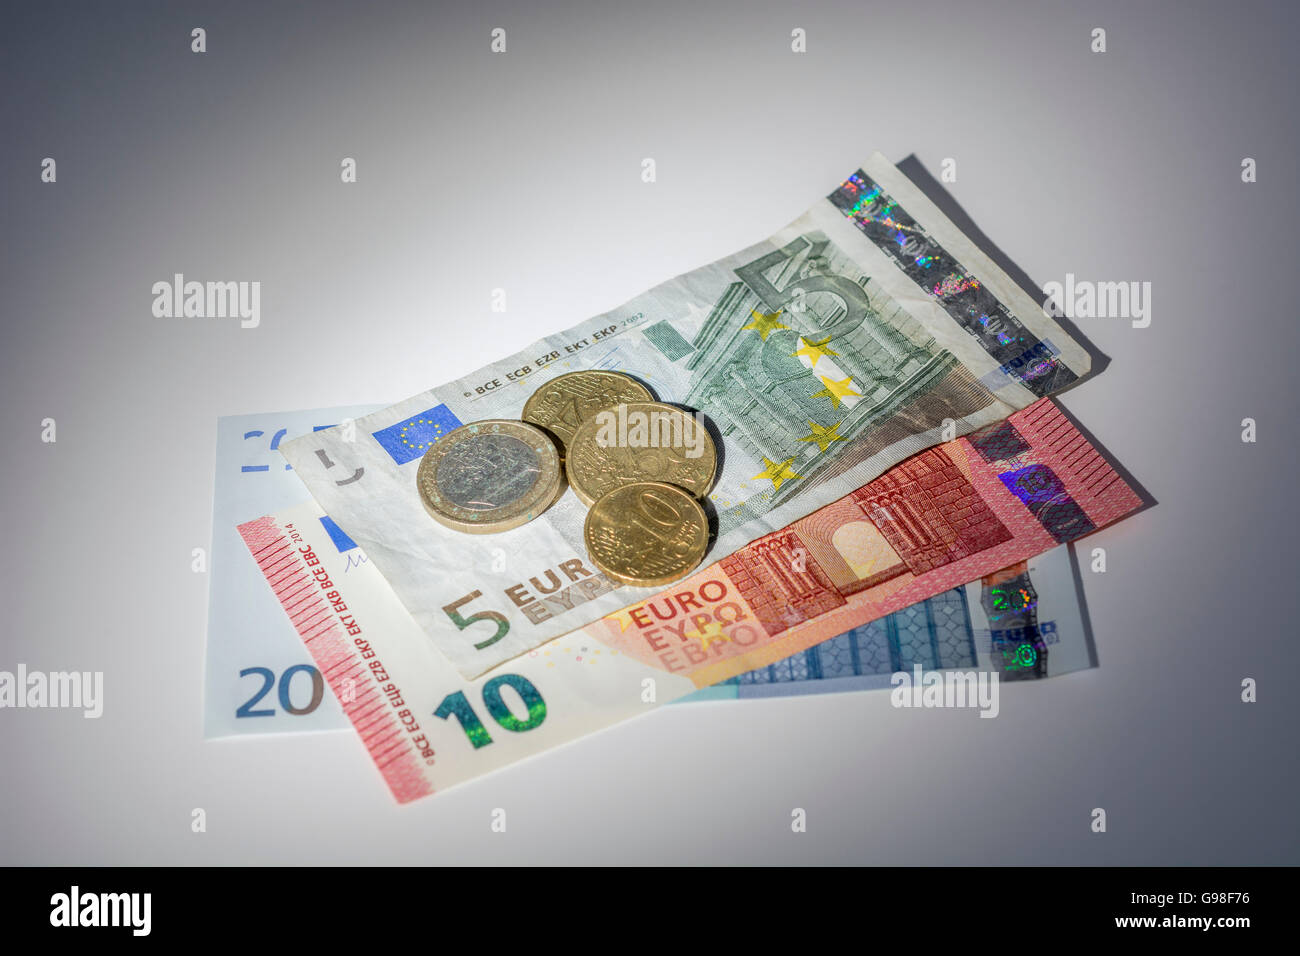 Concept of Euro zone, monetary union, single market represented by some Euro banknotes and coins. Stock Photo